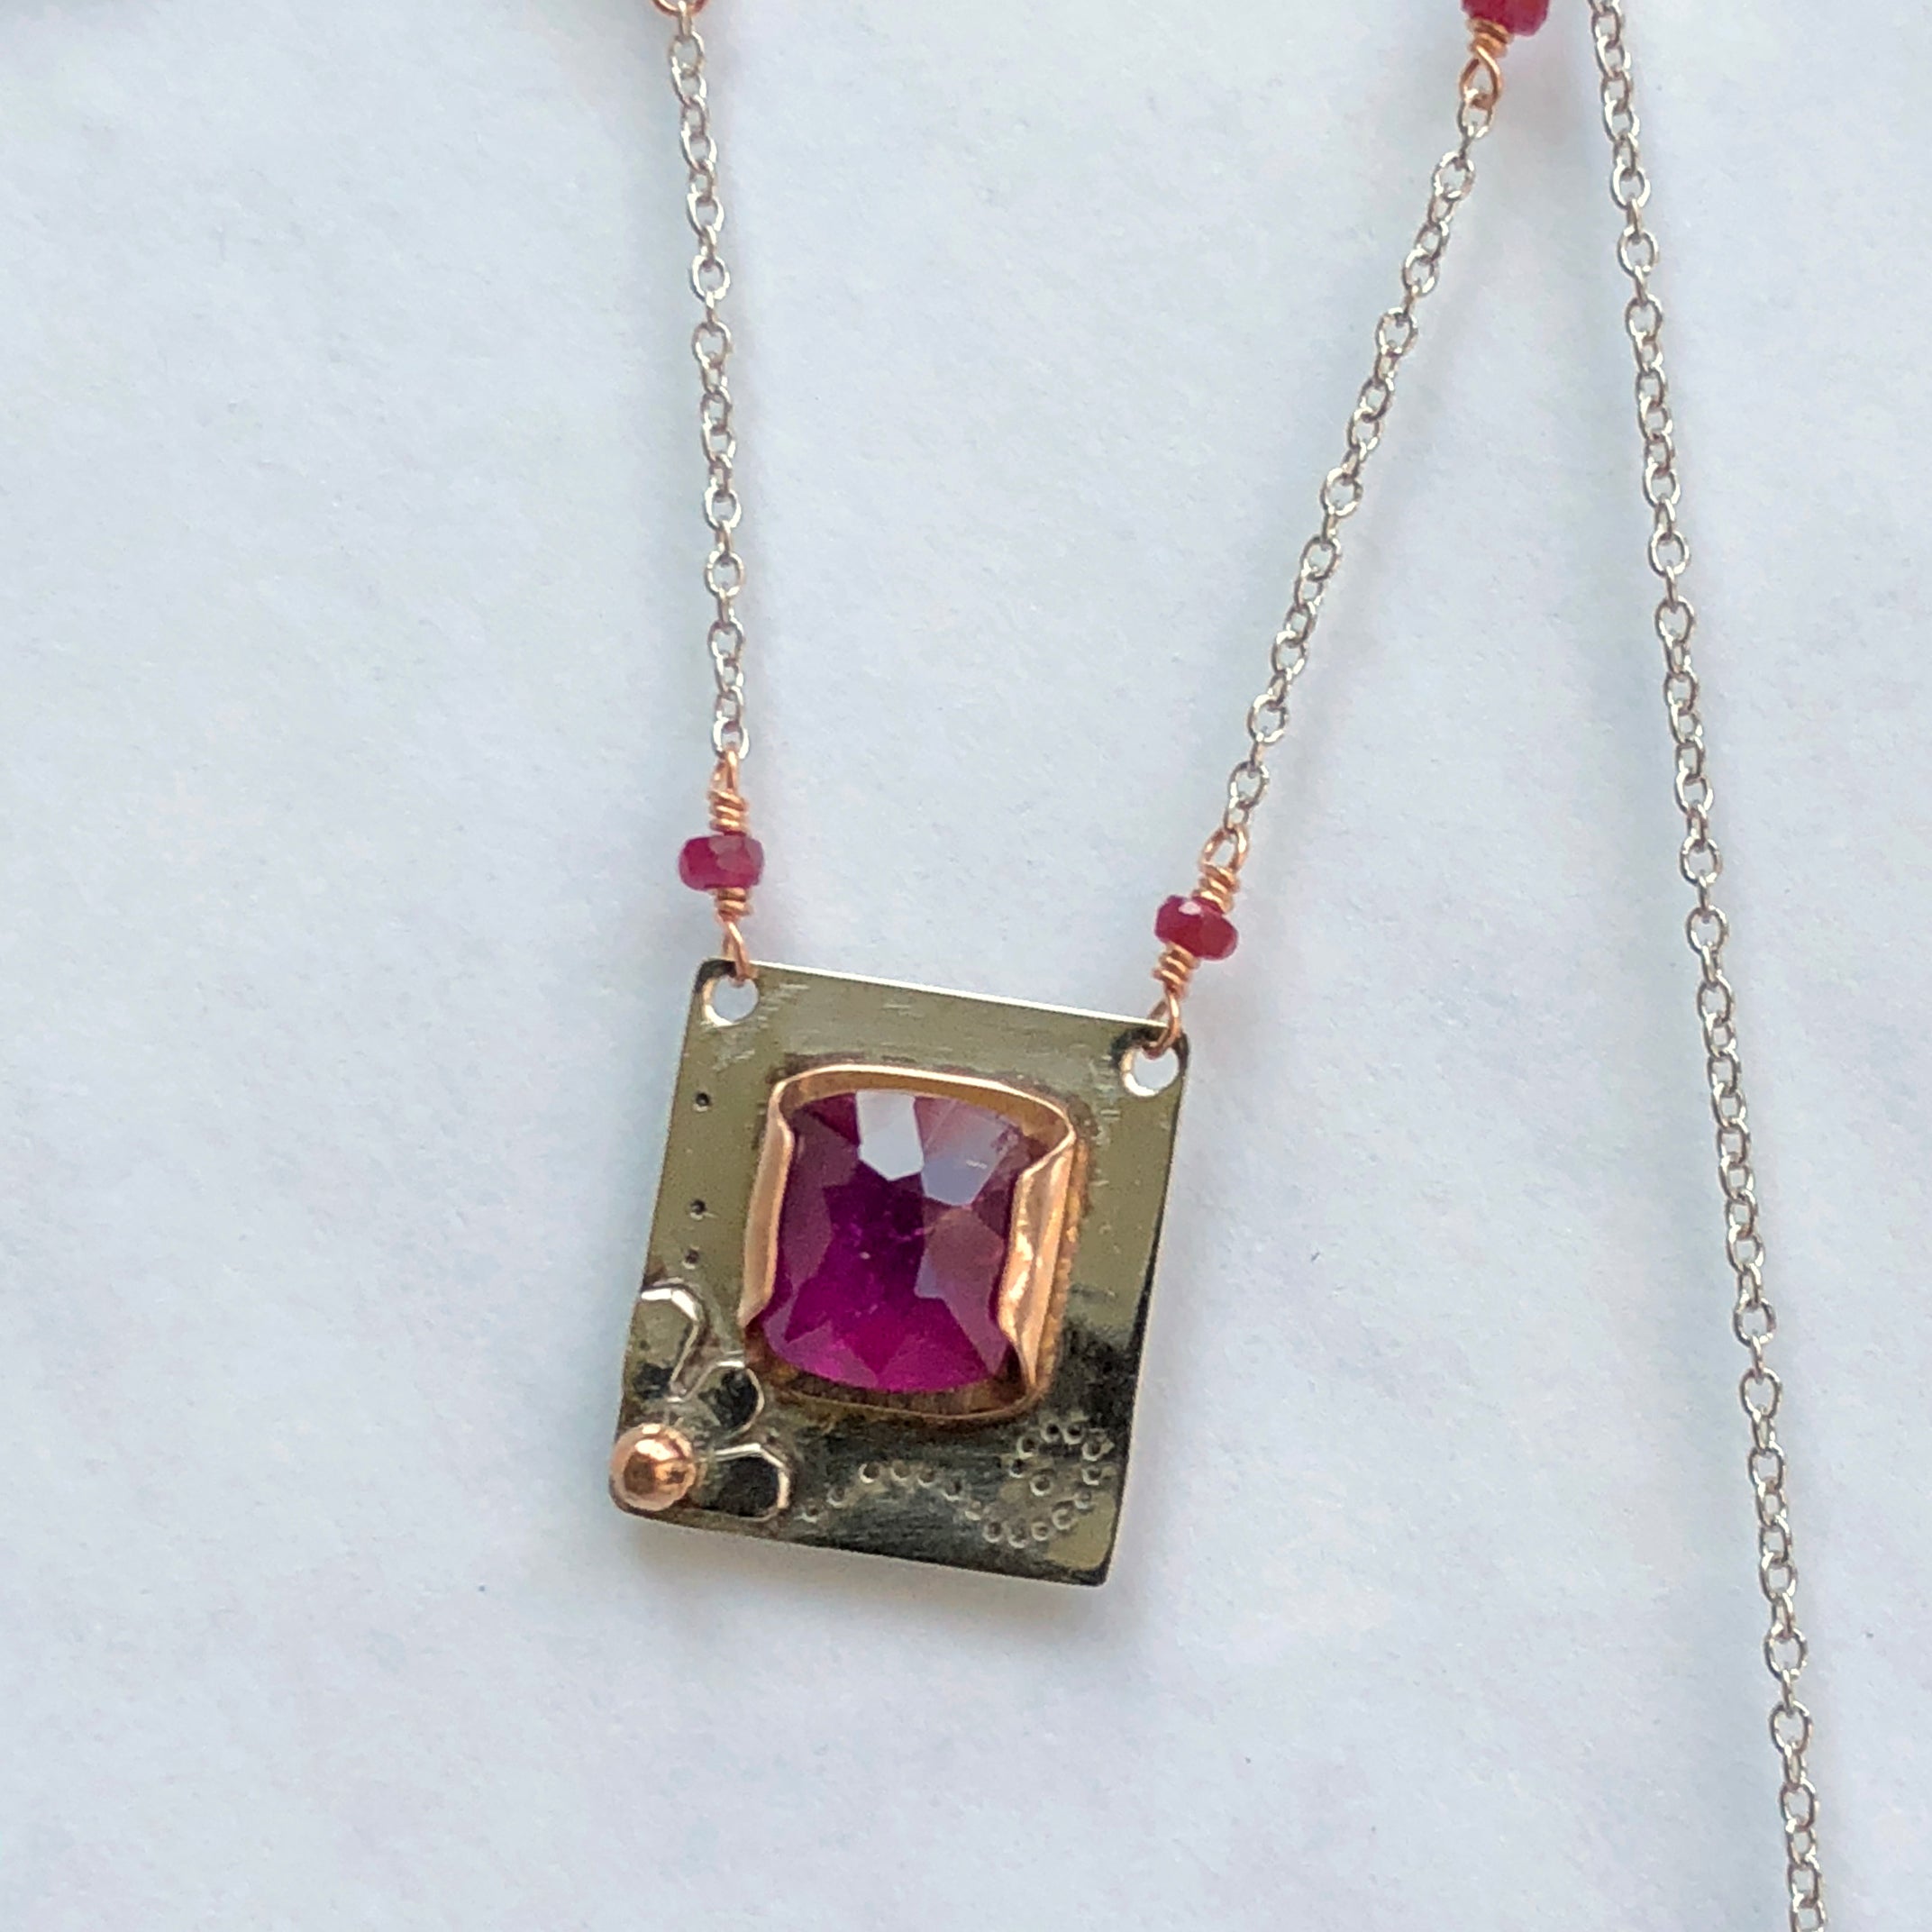 14K Ruby Necklace, GIA Certified, Solid White Gold, One of a kind